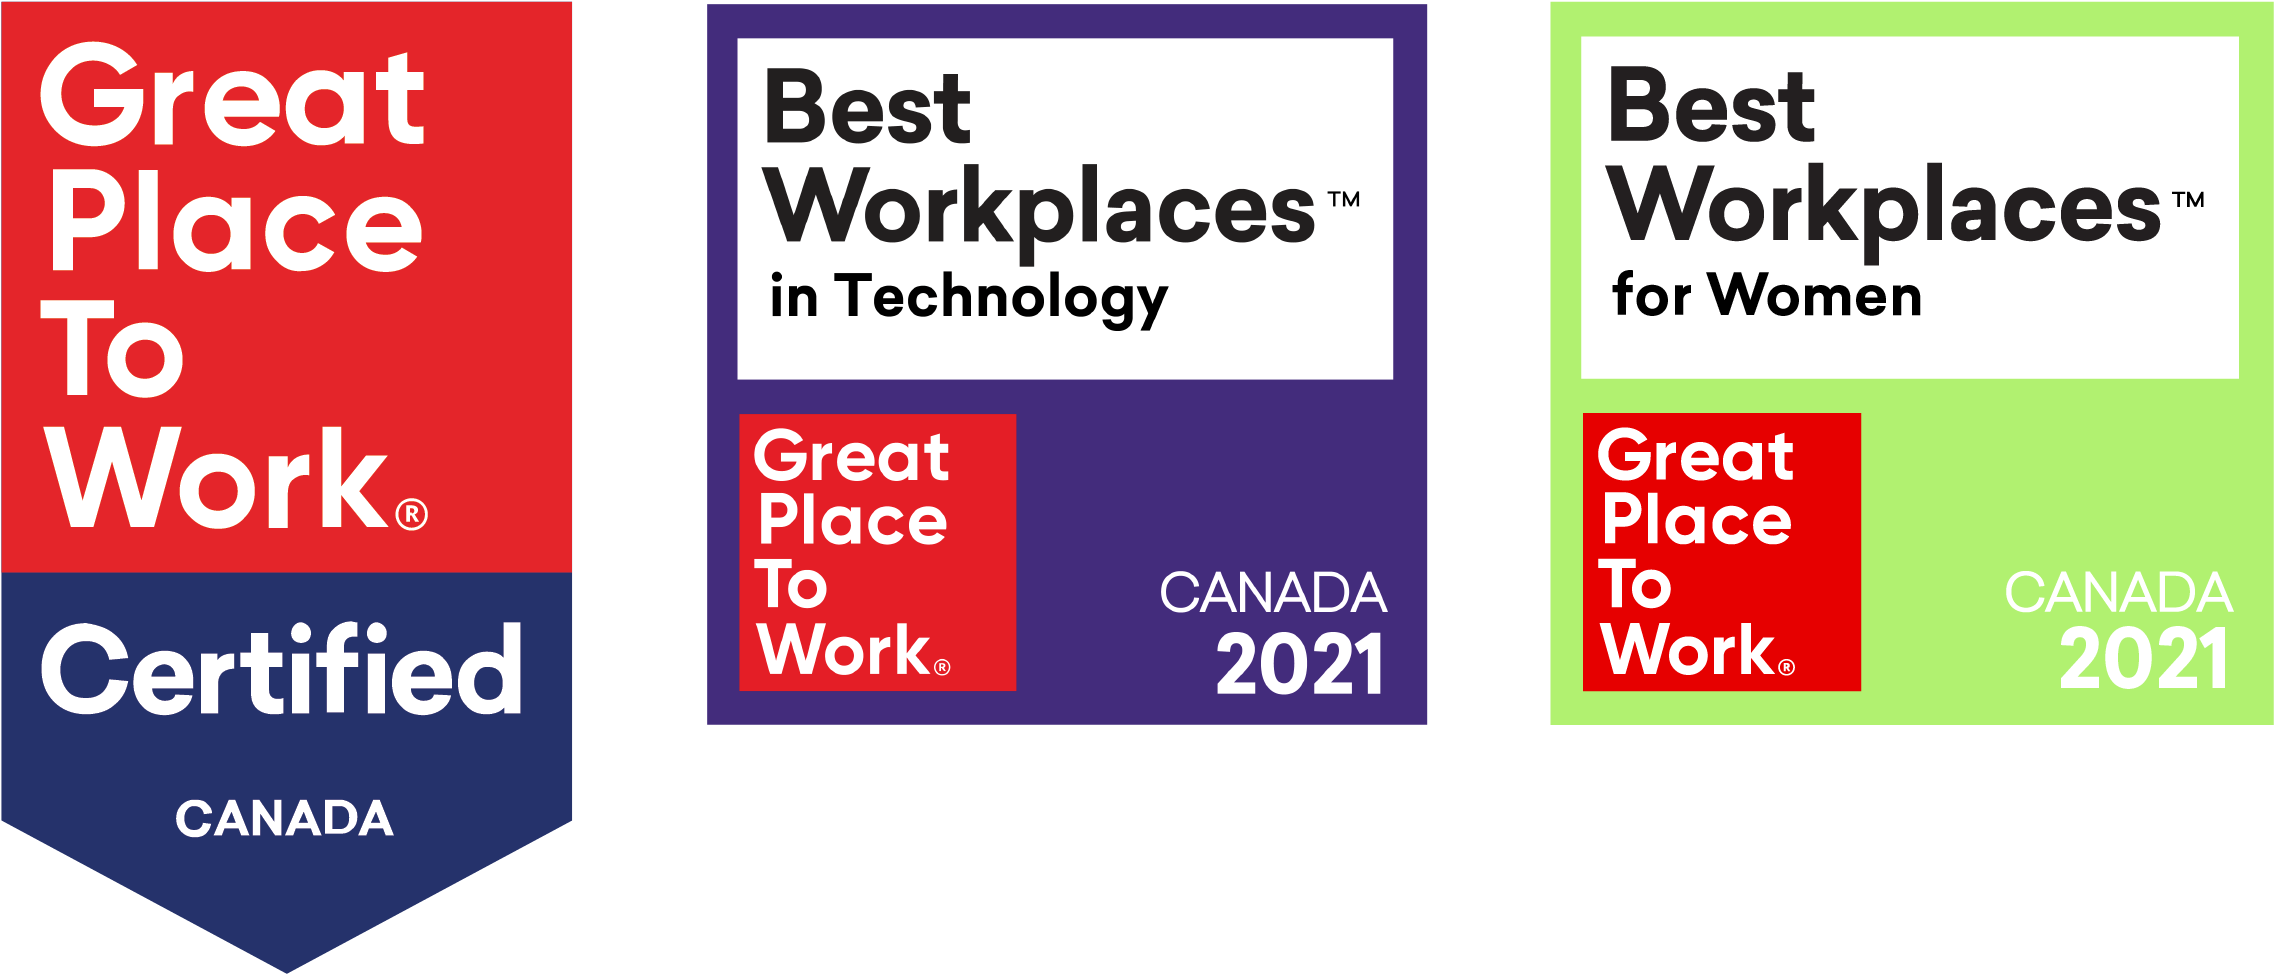 How to get on the list of Best Workplaces in Canada | Great Place To ...